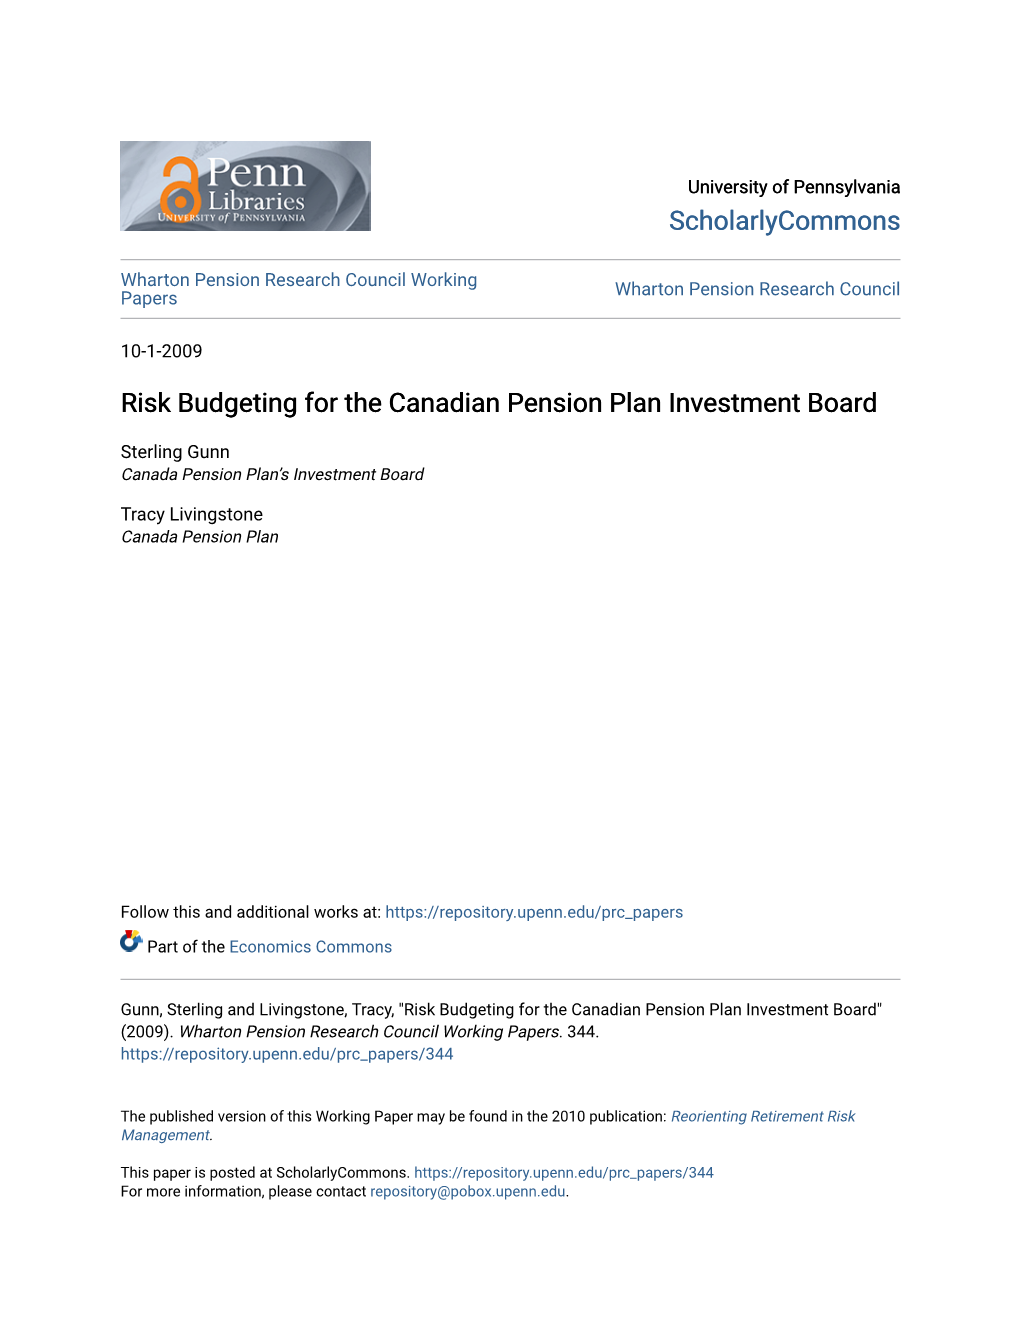 Risk Budgeting for the Canadian Pension Plan Investment Board